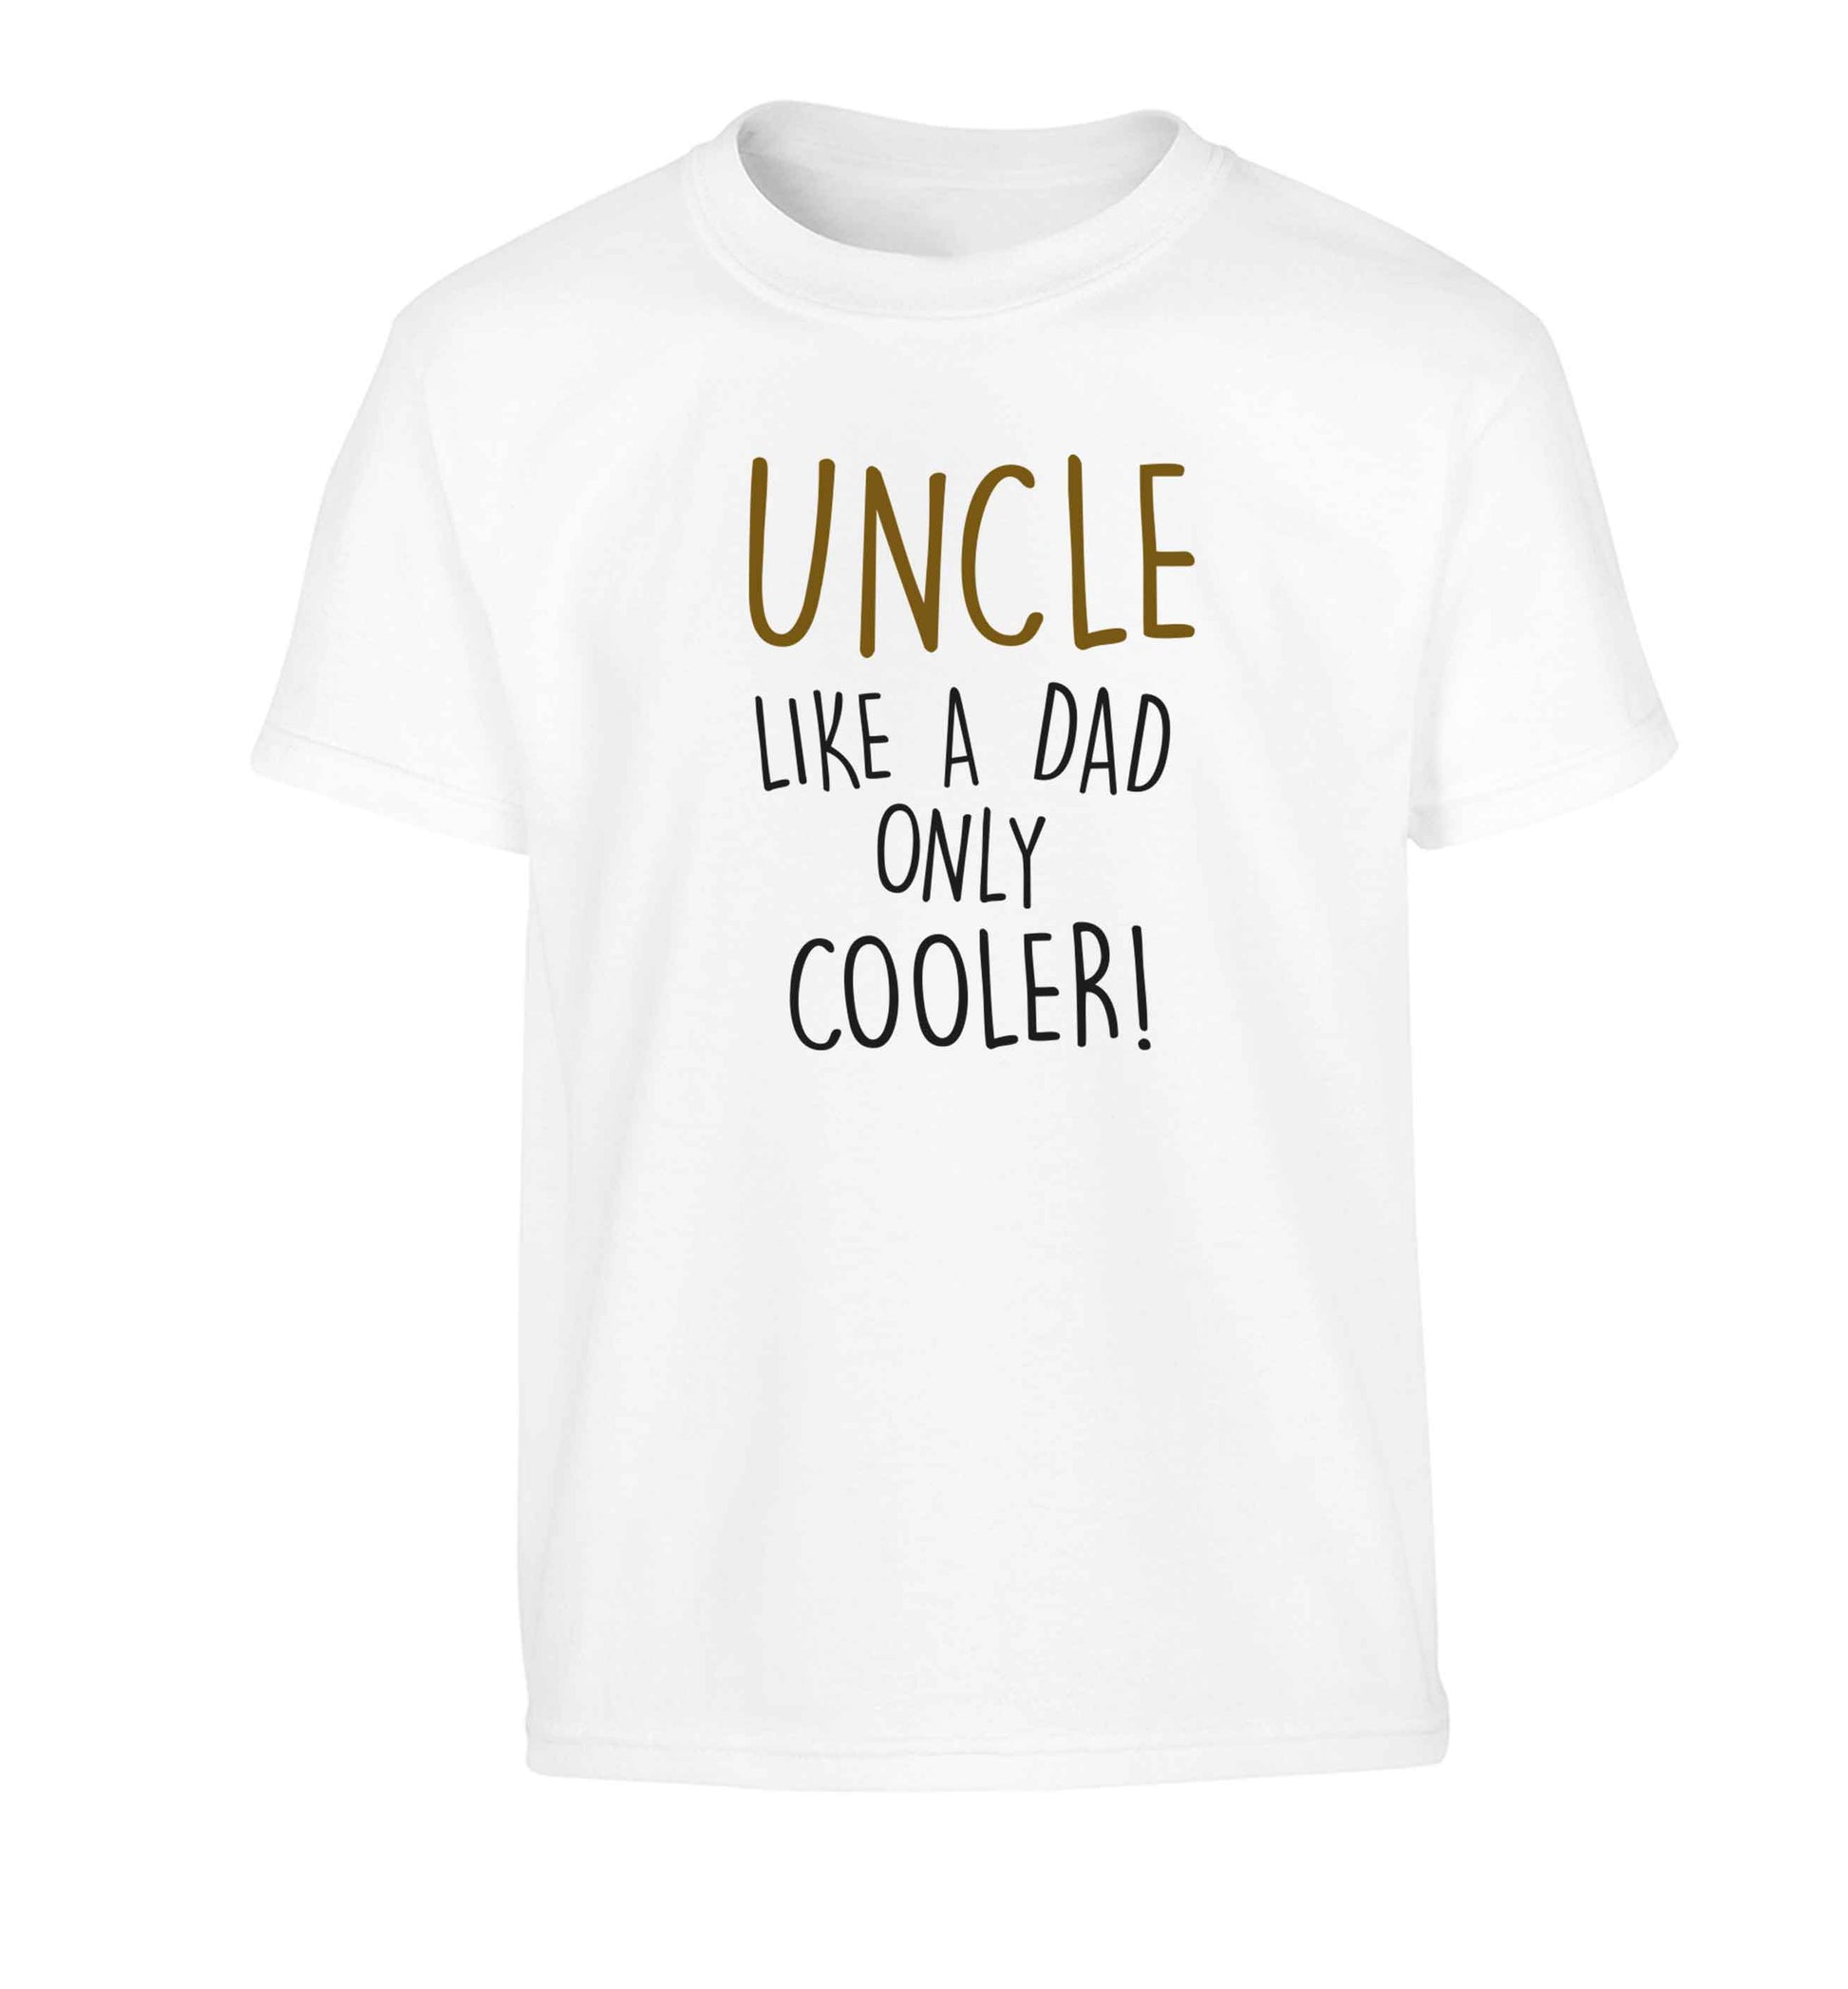 Uncle like a dad only cooler Children's white Tshirt 12-13 Years